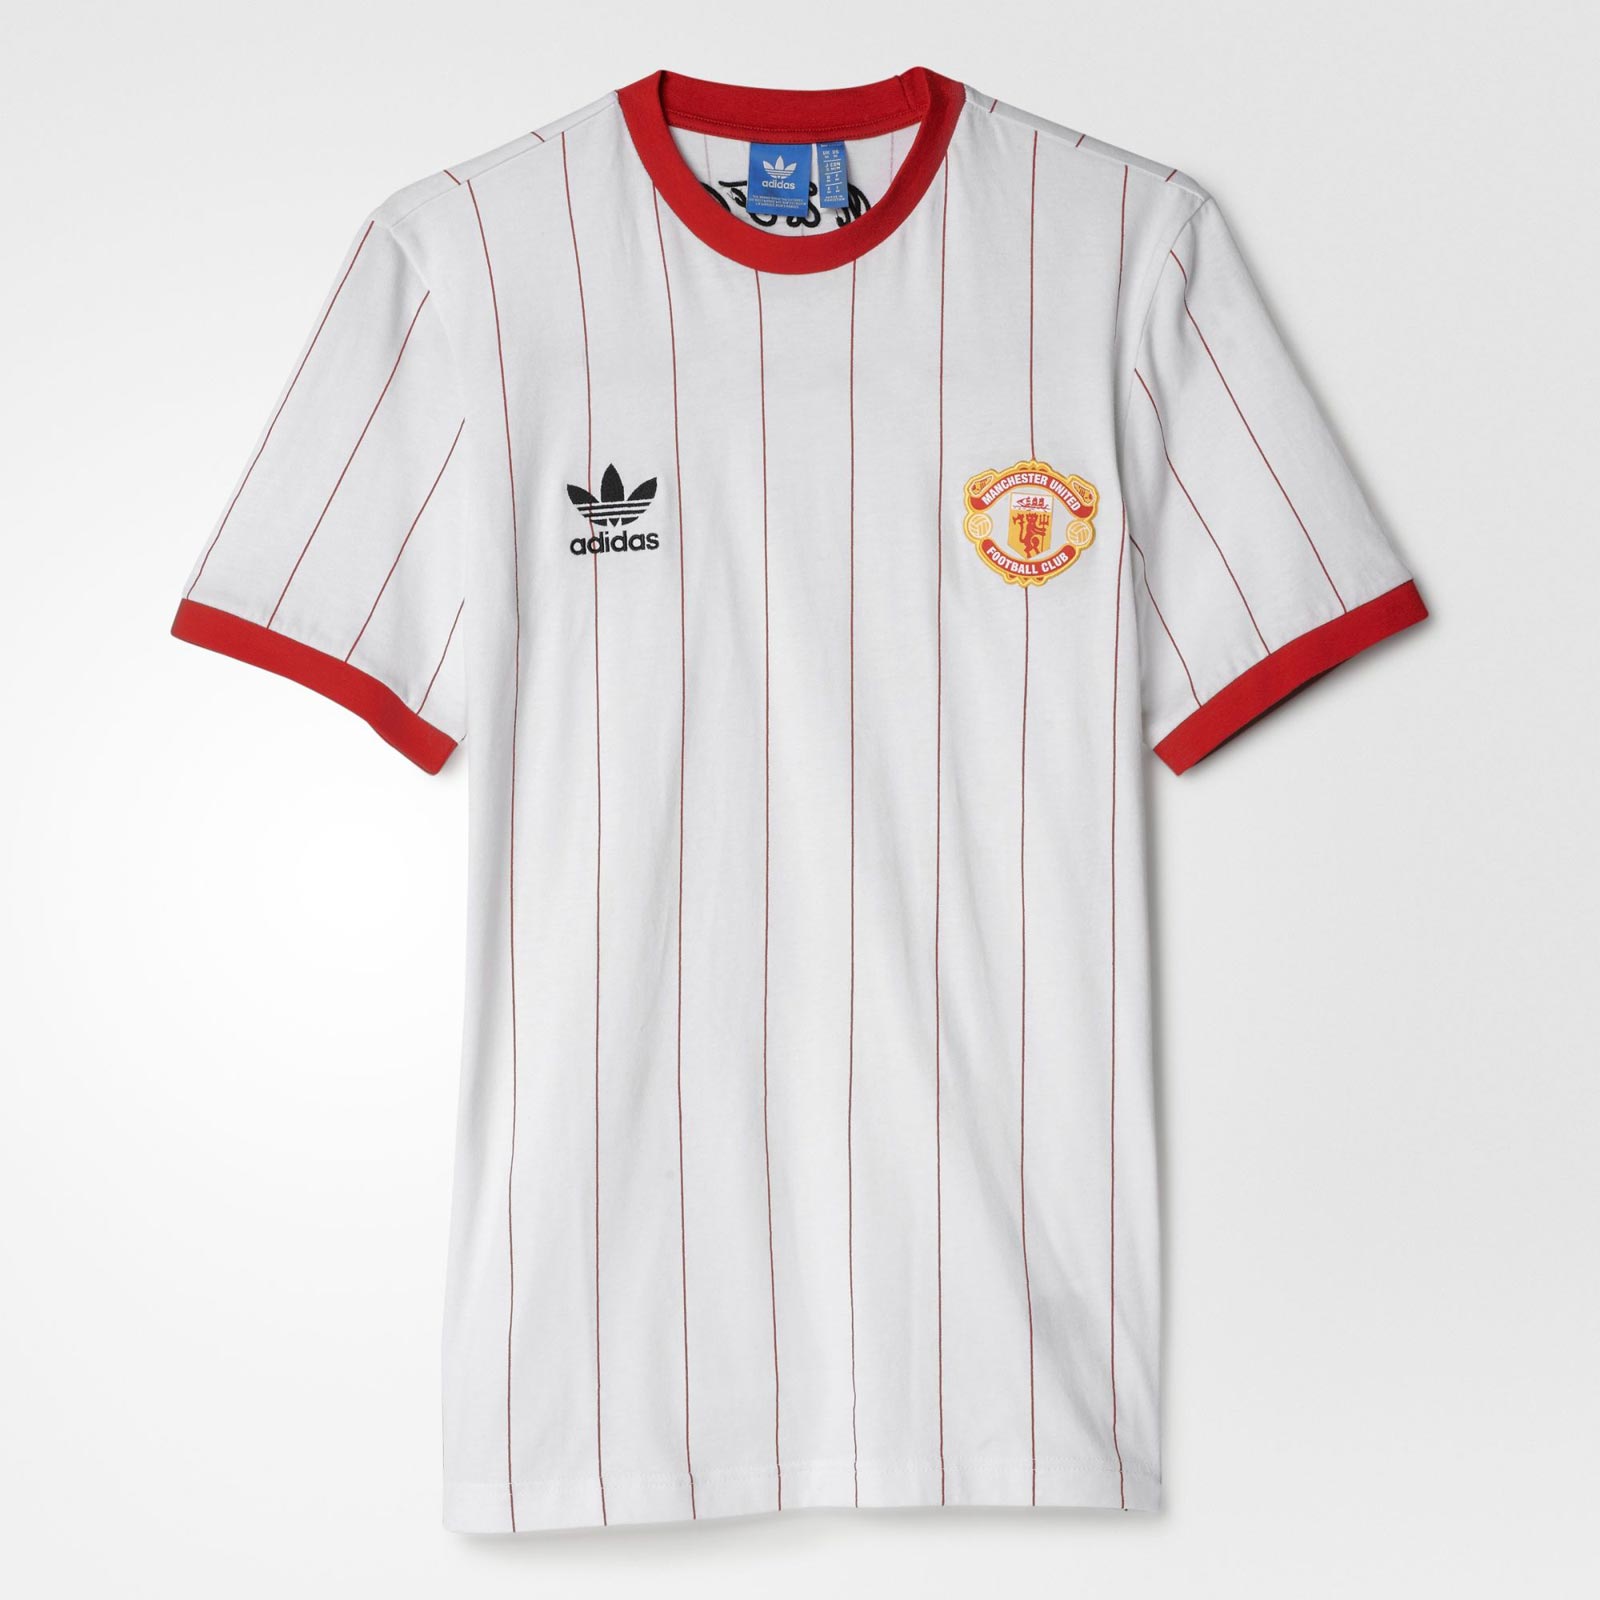 New Adidas Originals Manchester United Collection Unveiled - Footy